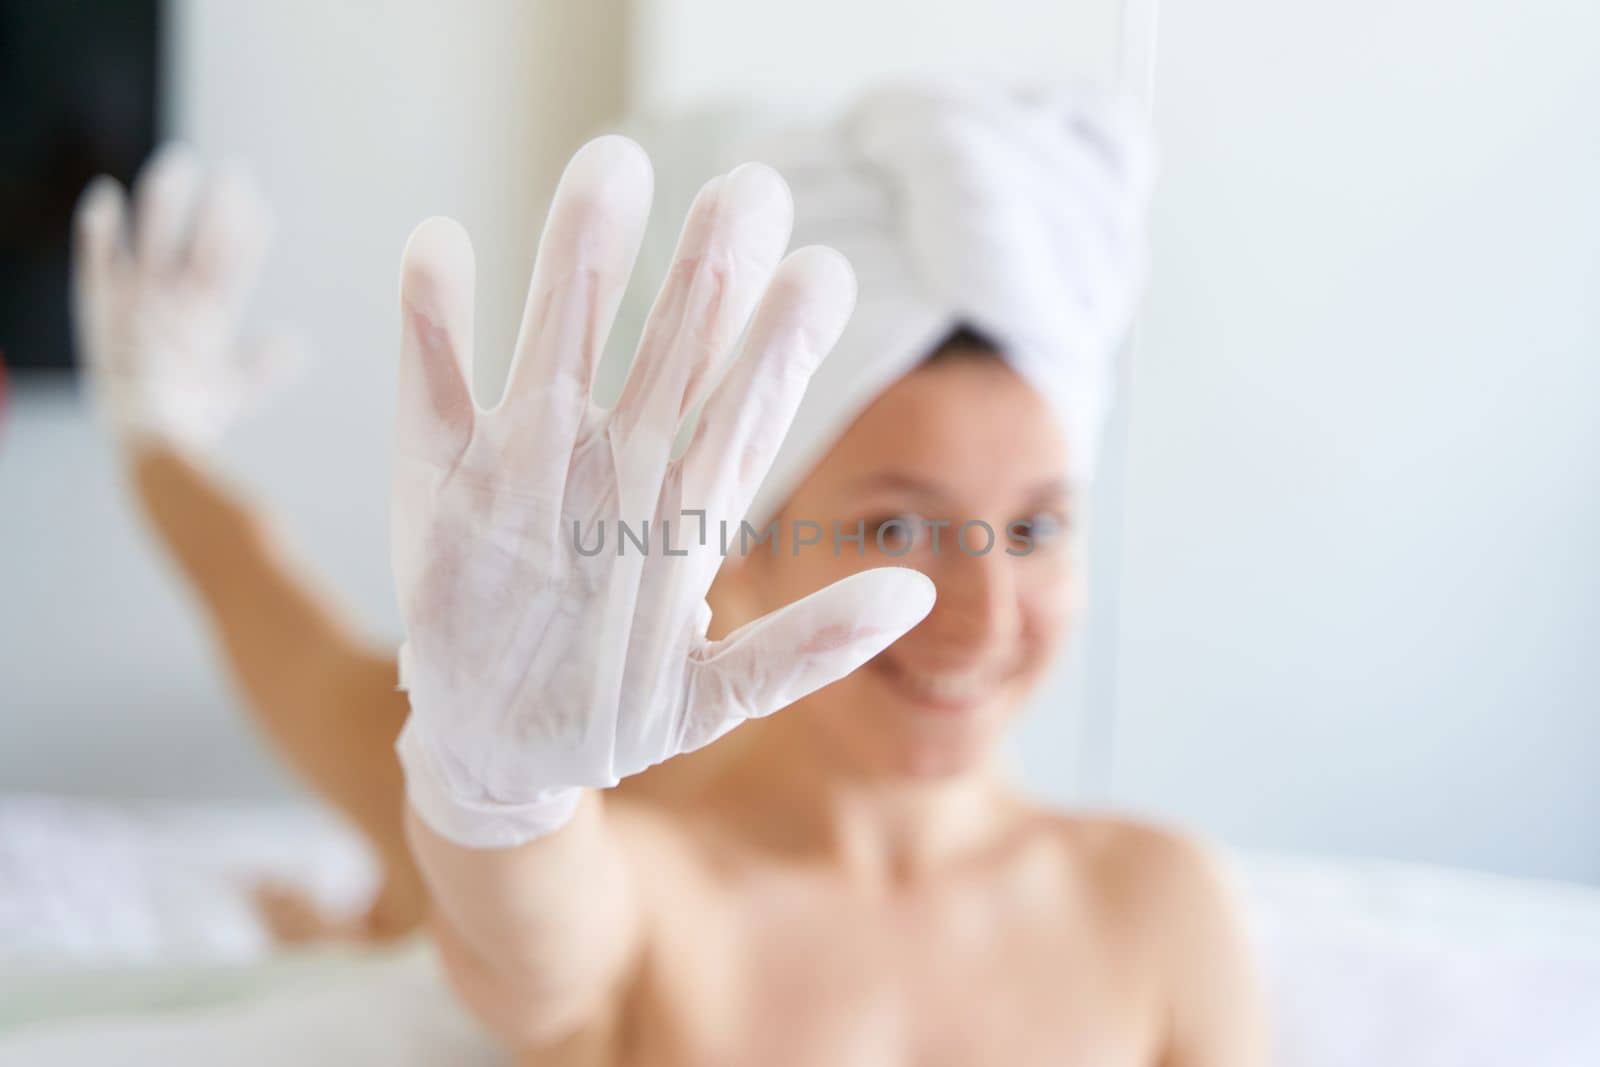 After a shower, a girl wrapped in a towel uses cosmetic gloves to moisturize the skin of her hands. Cosmetic trends for body care at home by Try_my_best